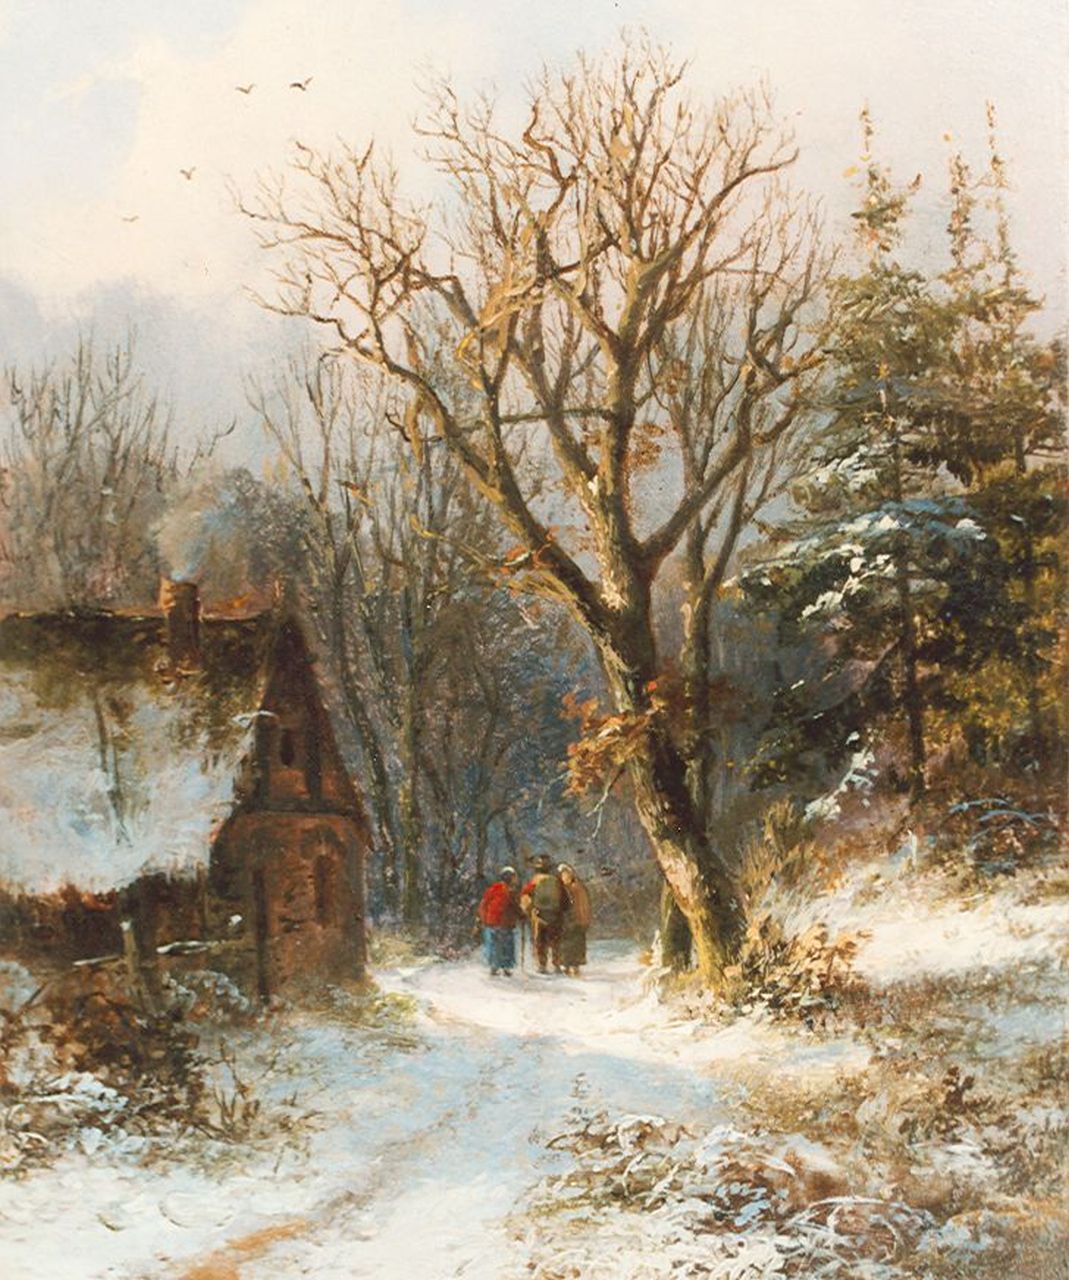 Daiwaille A.J.  | Alexander Joseph Daiwaille, Travellers on a country lane in winter, oil on panel 14.7 x 12.0 cm, signed indistinctly